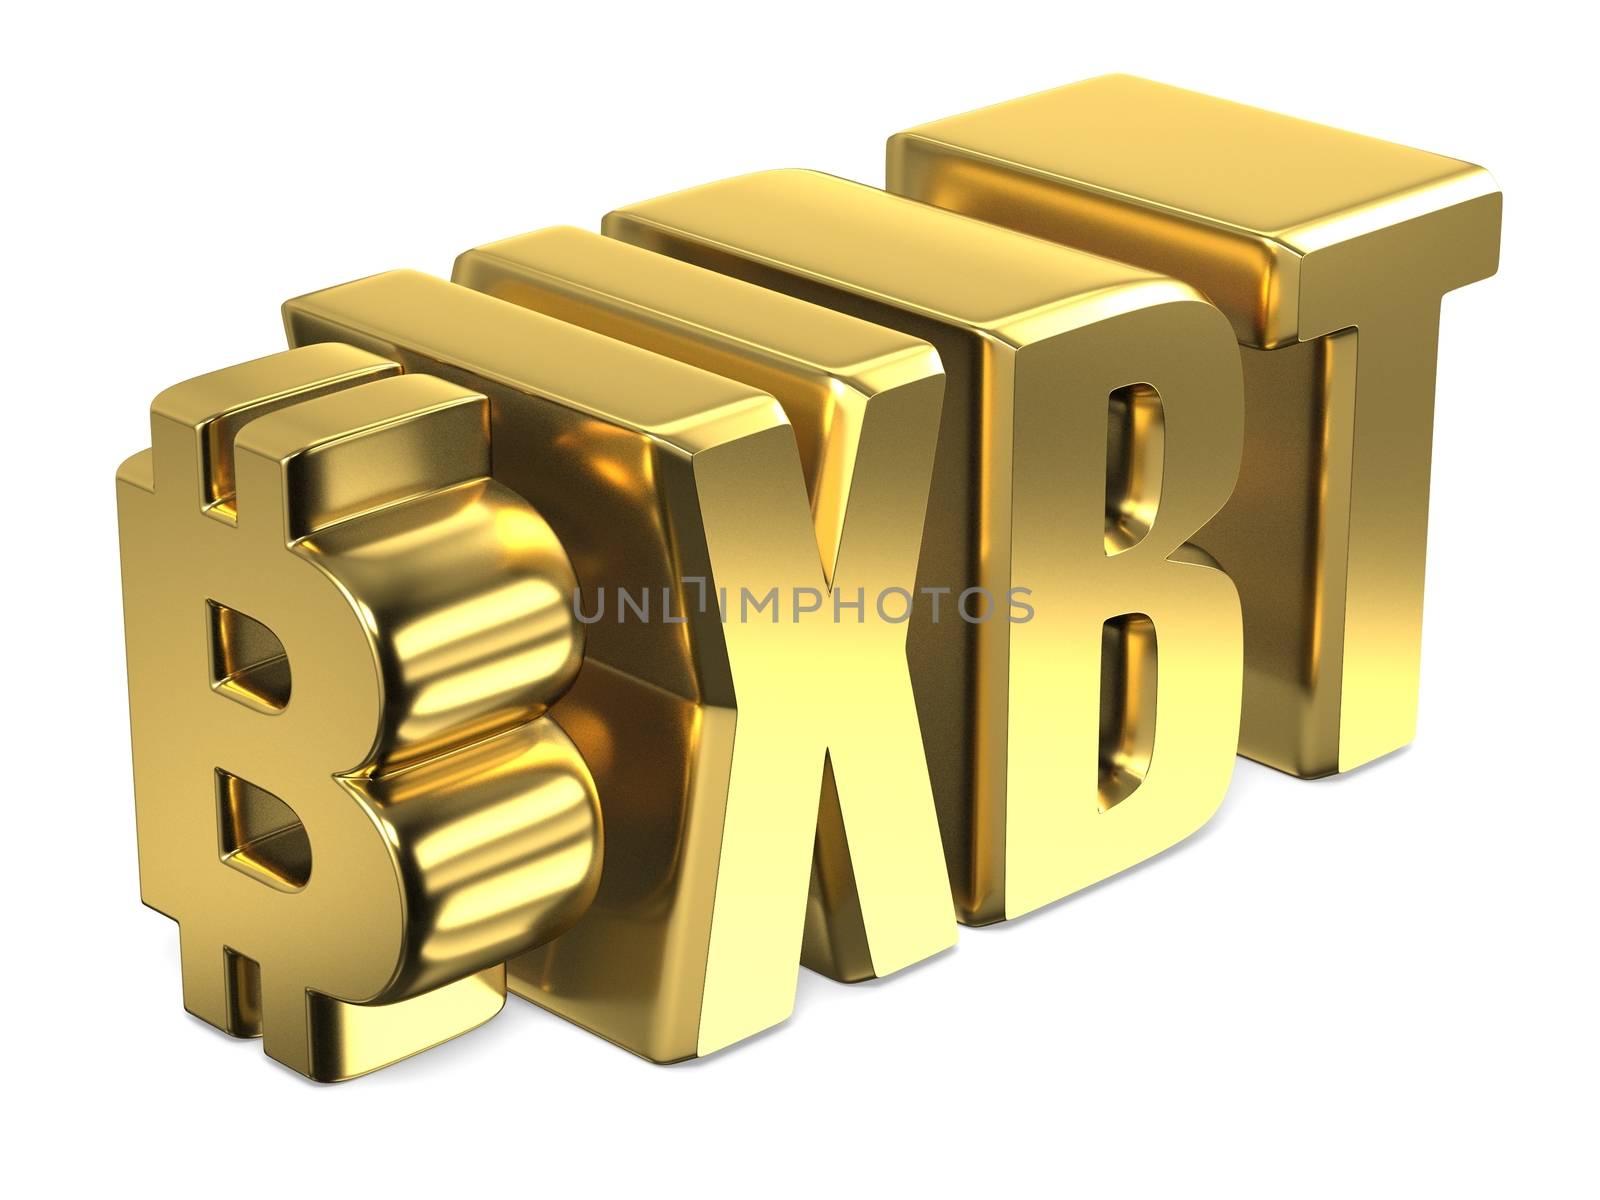 Bitcoin XBT golden currency sign 3D render illustration isolated on white background